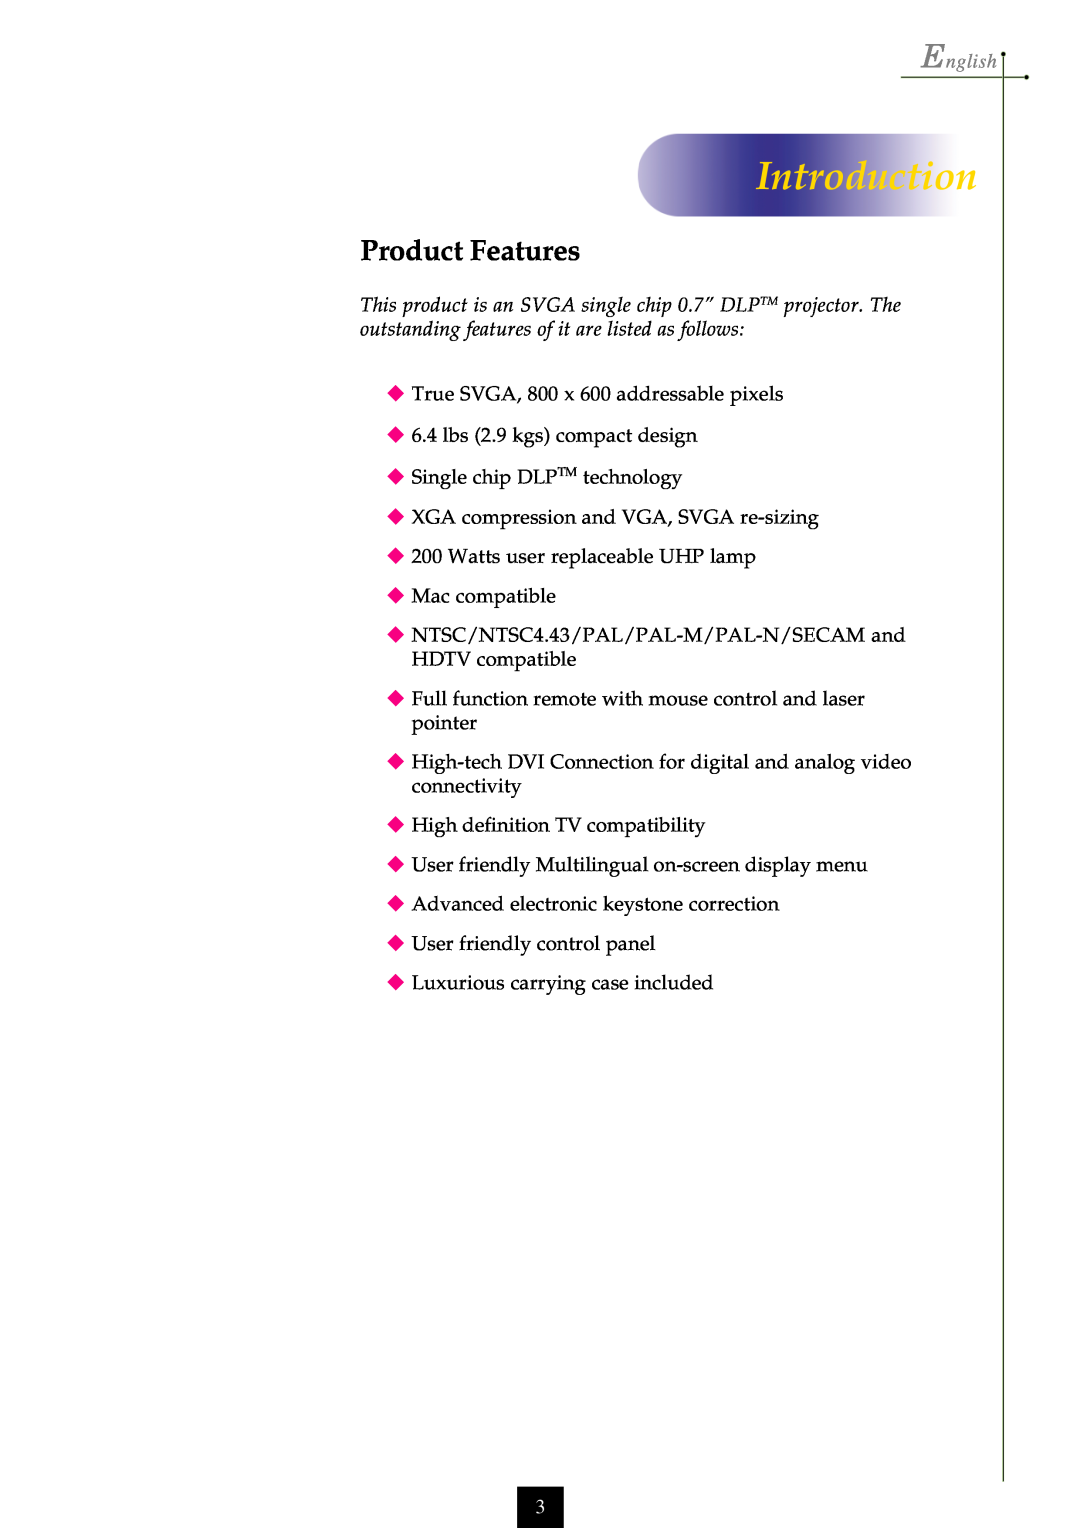 Optoma Technology EP750 specifications Introduction, Product Features, English 